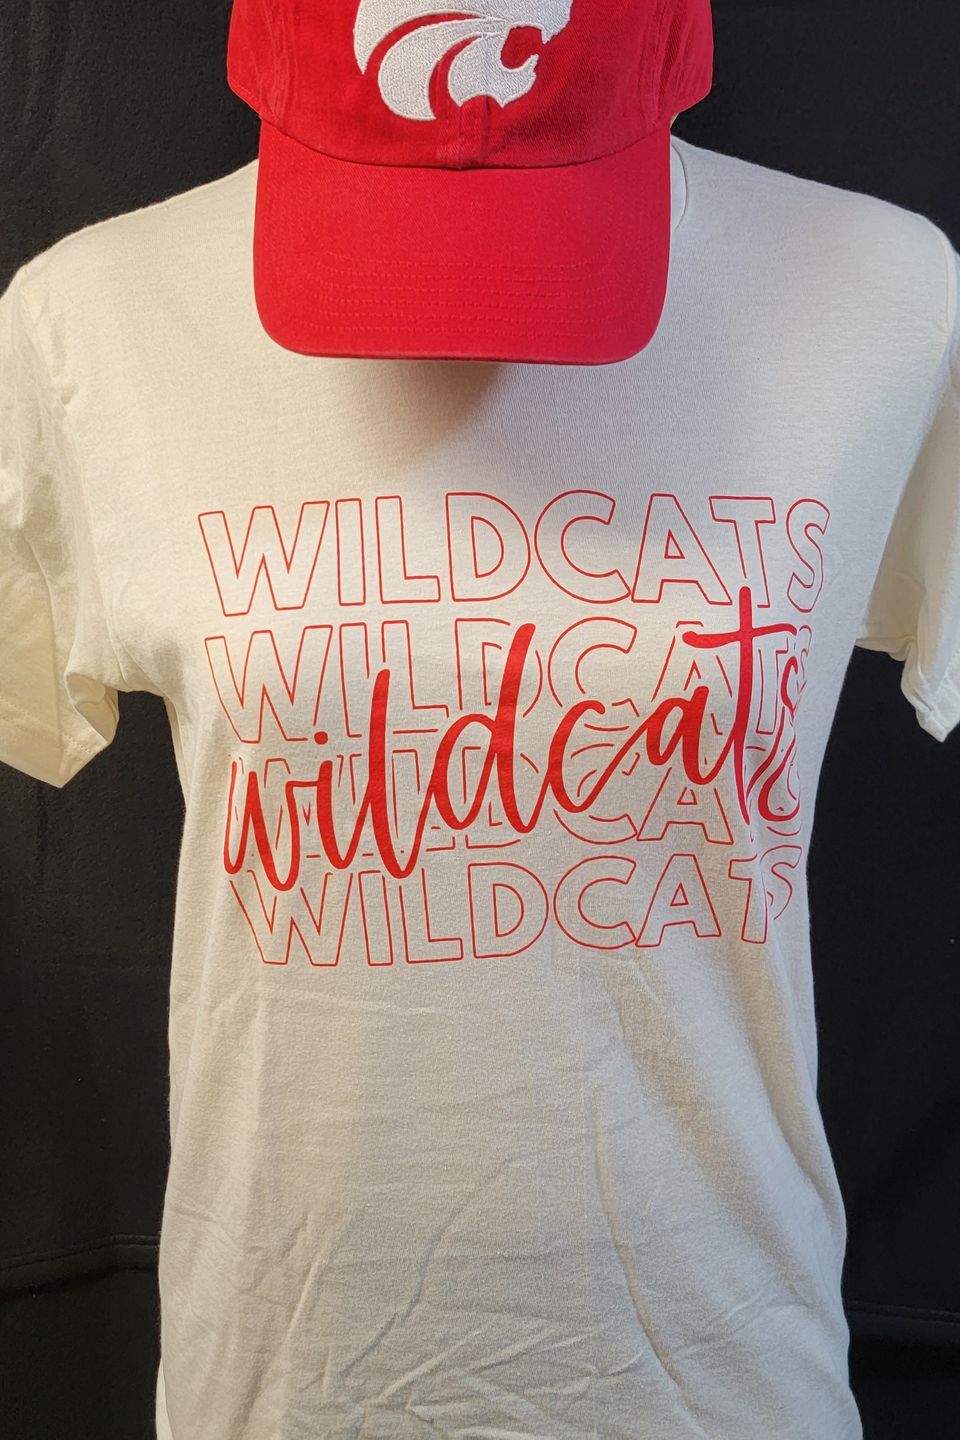 Example of Direct to Film (DTF) - Wildcats school name and logo on a white t-shirt and red cap.